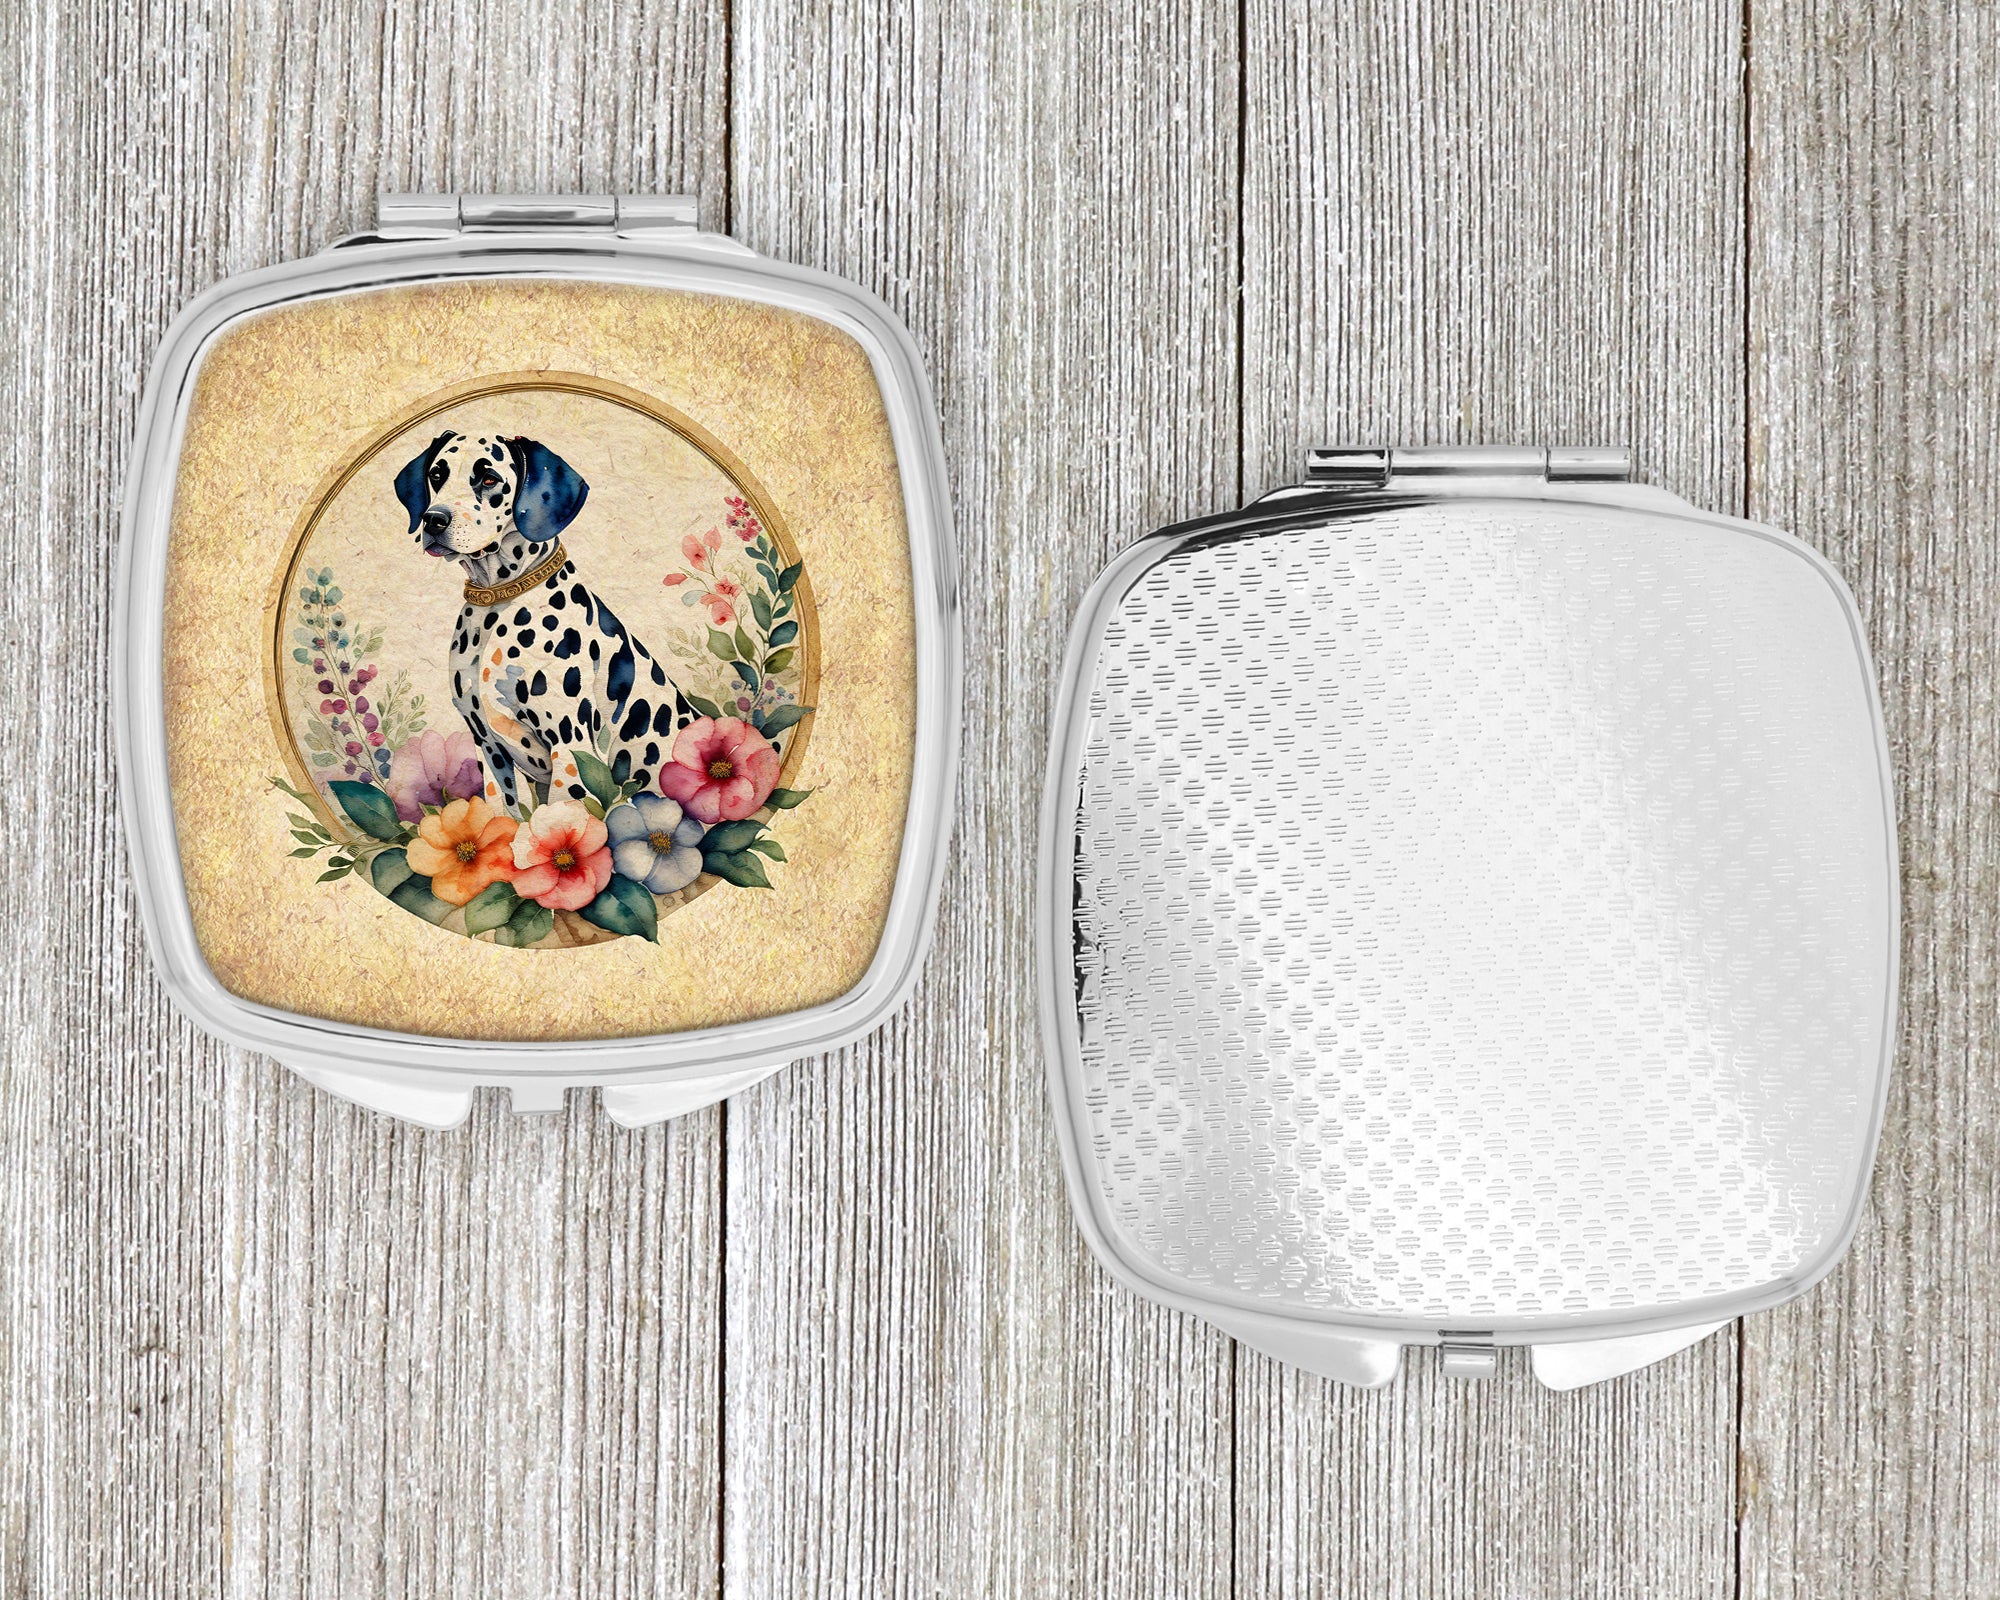 Dalmatian and Flowers Compact Mirror